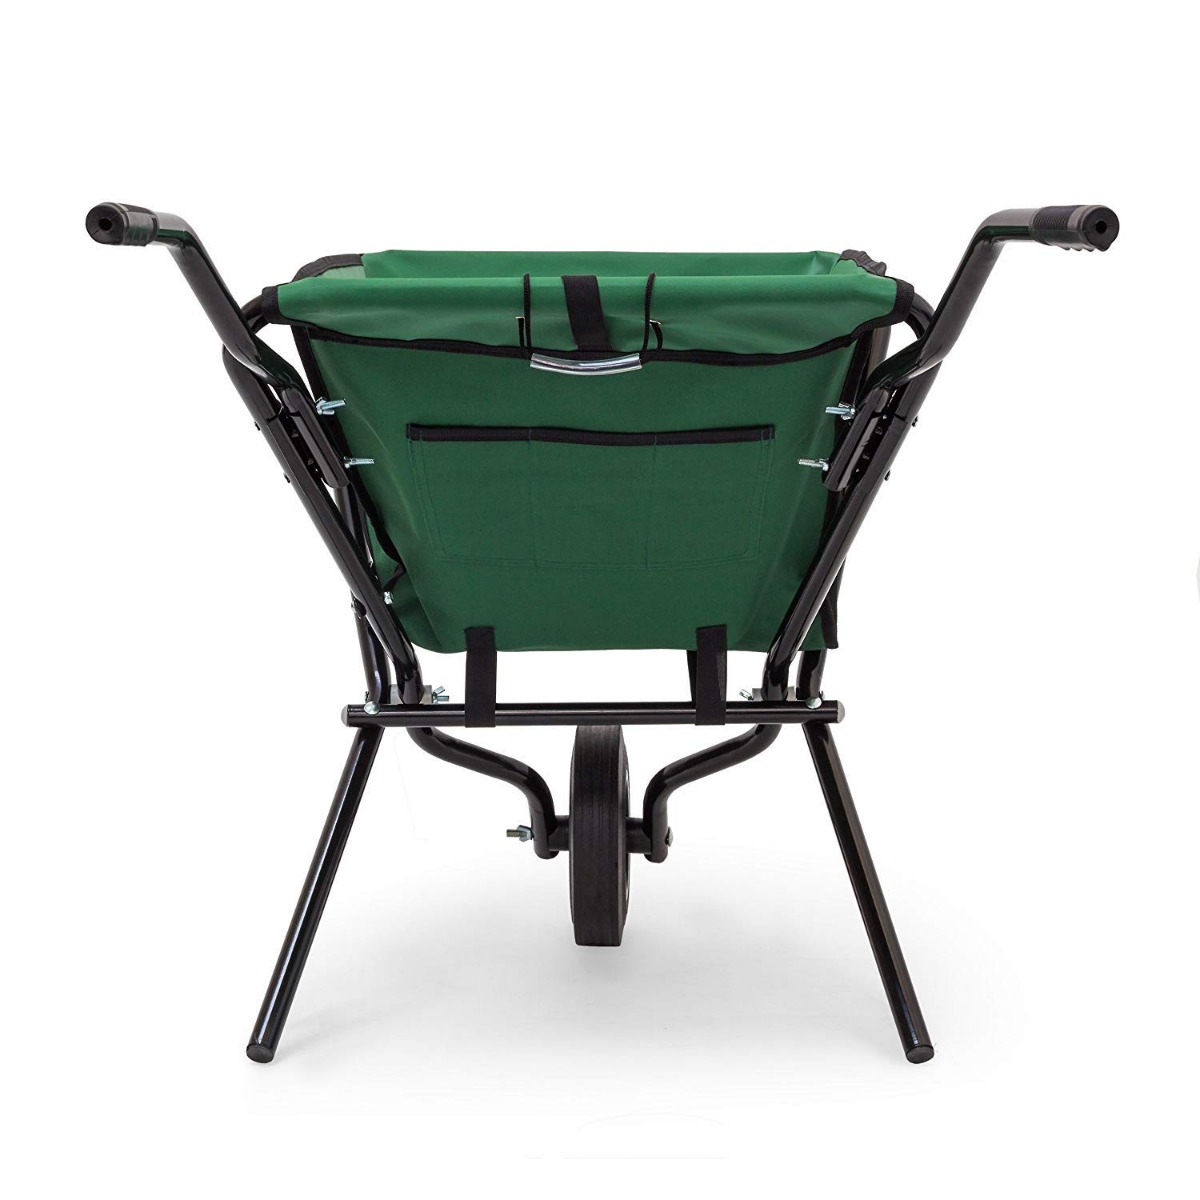 Green Foldable Wheelbarrow 66x64x112cm – 26x25x44in – Steel with Strong Polyester Space-Saving Garden Cart Gardening Wheelbarrow Holds up to 30 kg (60lbs) -7479